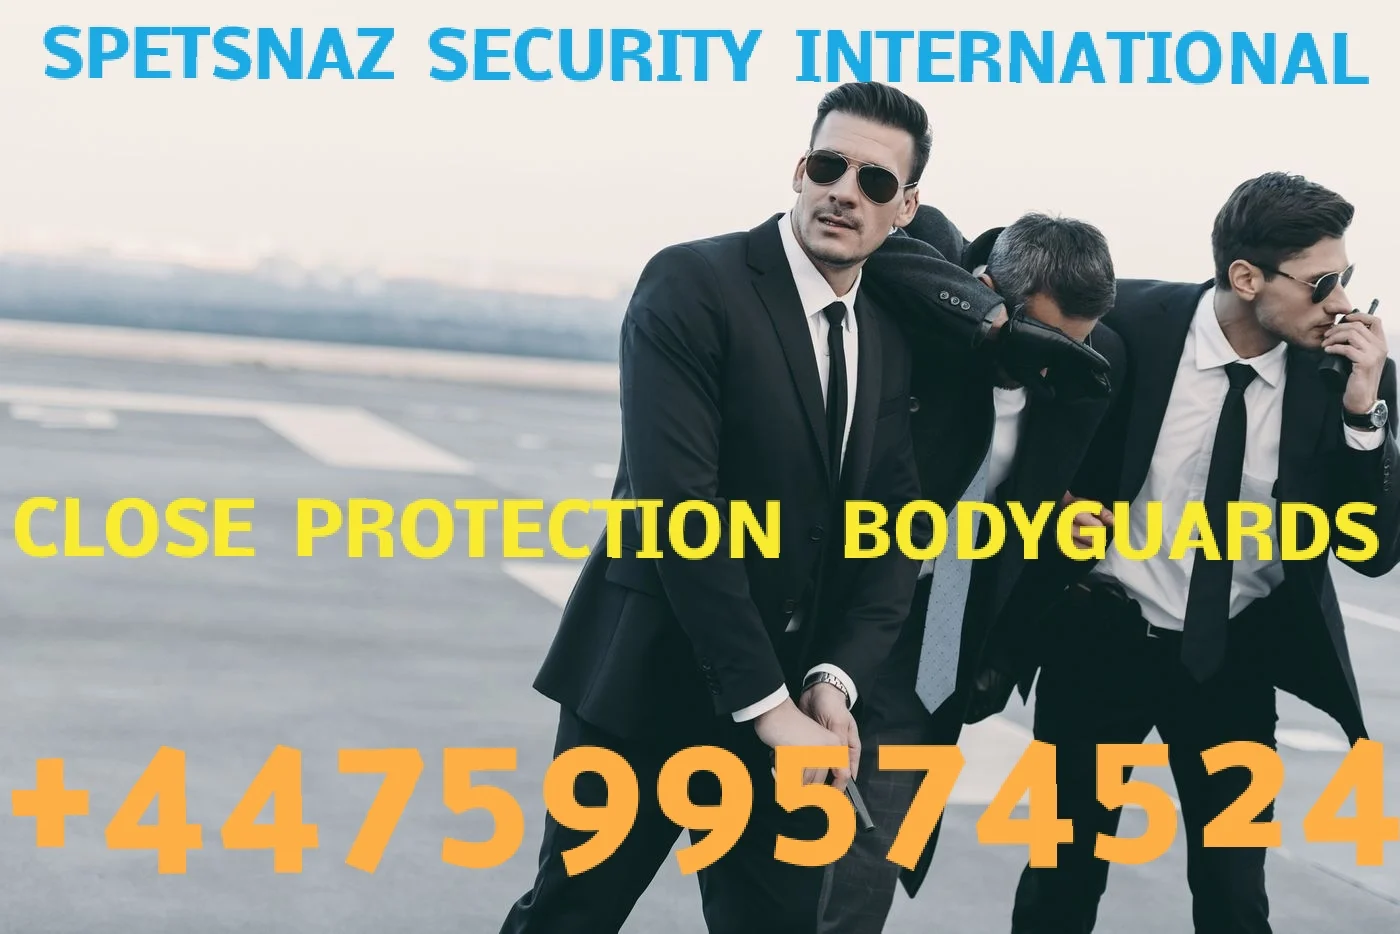 Armed Close Protection Services-Executive bodyguard-Executive Close Protection. With its close protection teams, The Spetsnaz Security International Fidel Matola can work with its clients to protect their business's most valuable assets – their personnel, families, and properties- at all potential risk situations.-